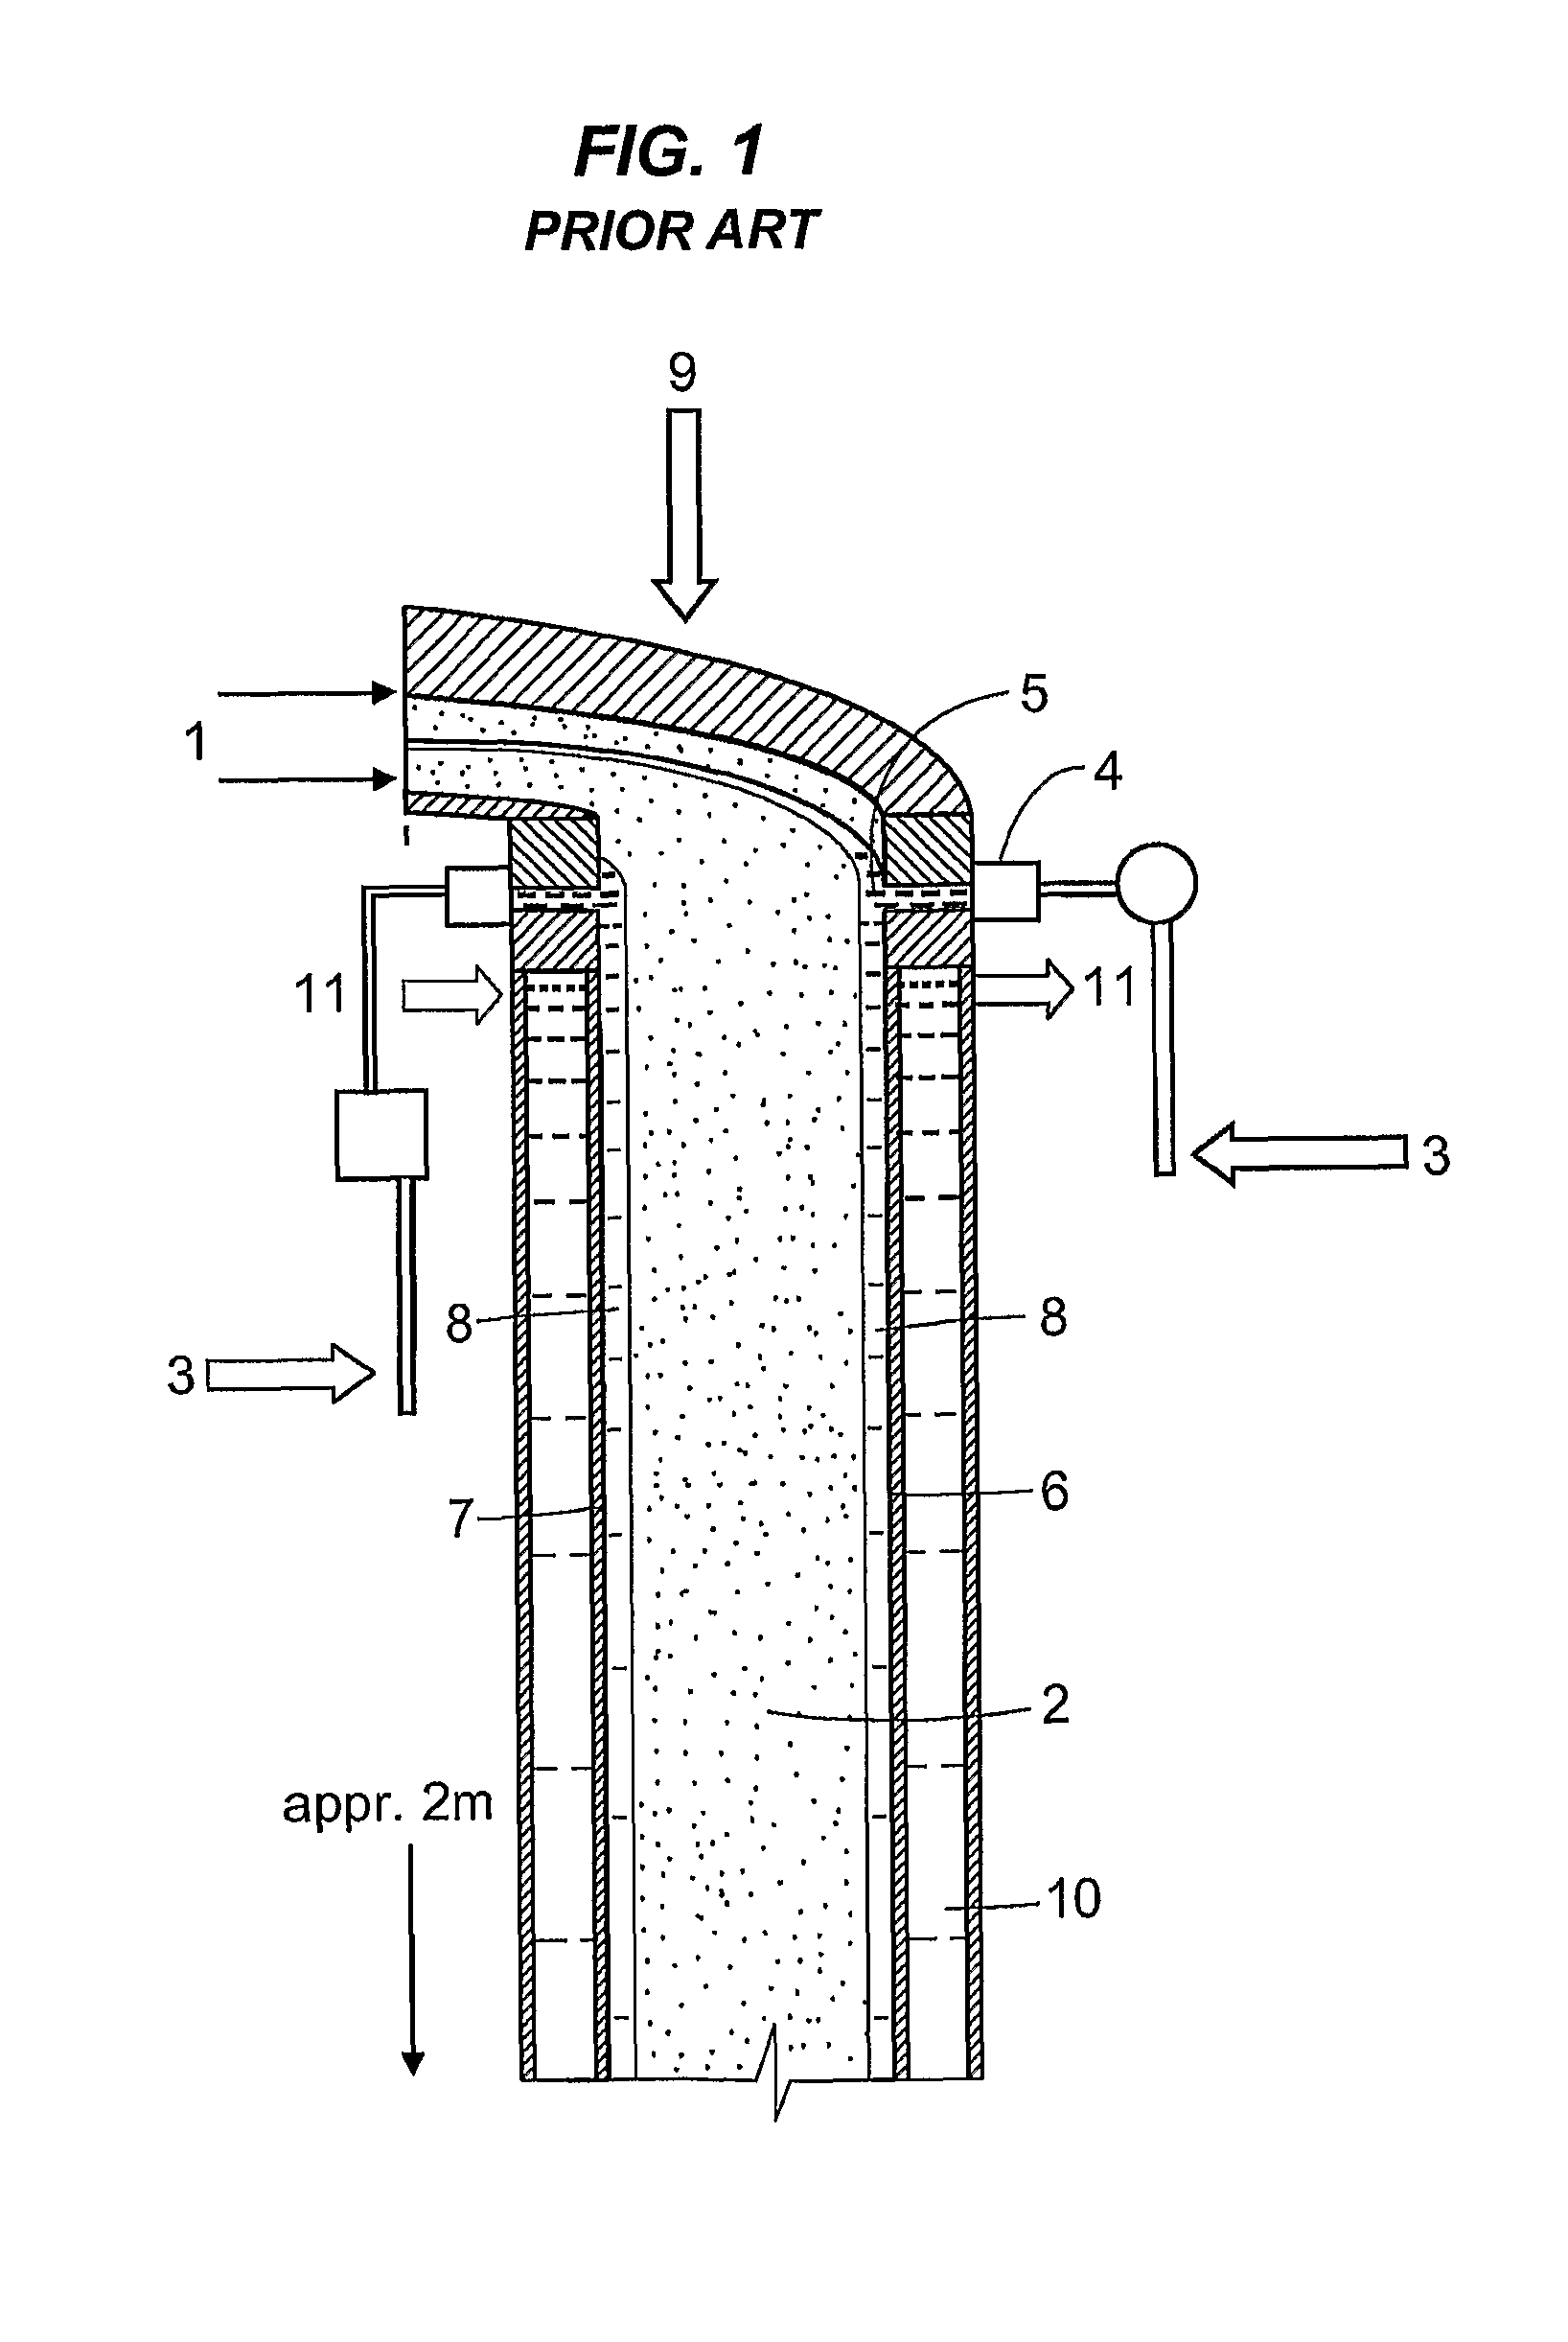 Method and device for the sulfonation or sulfation of sulfonatable or sulfatable organic substances and for performing faster, strongly exothermic gas/liquid reactions